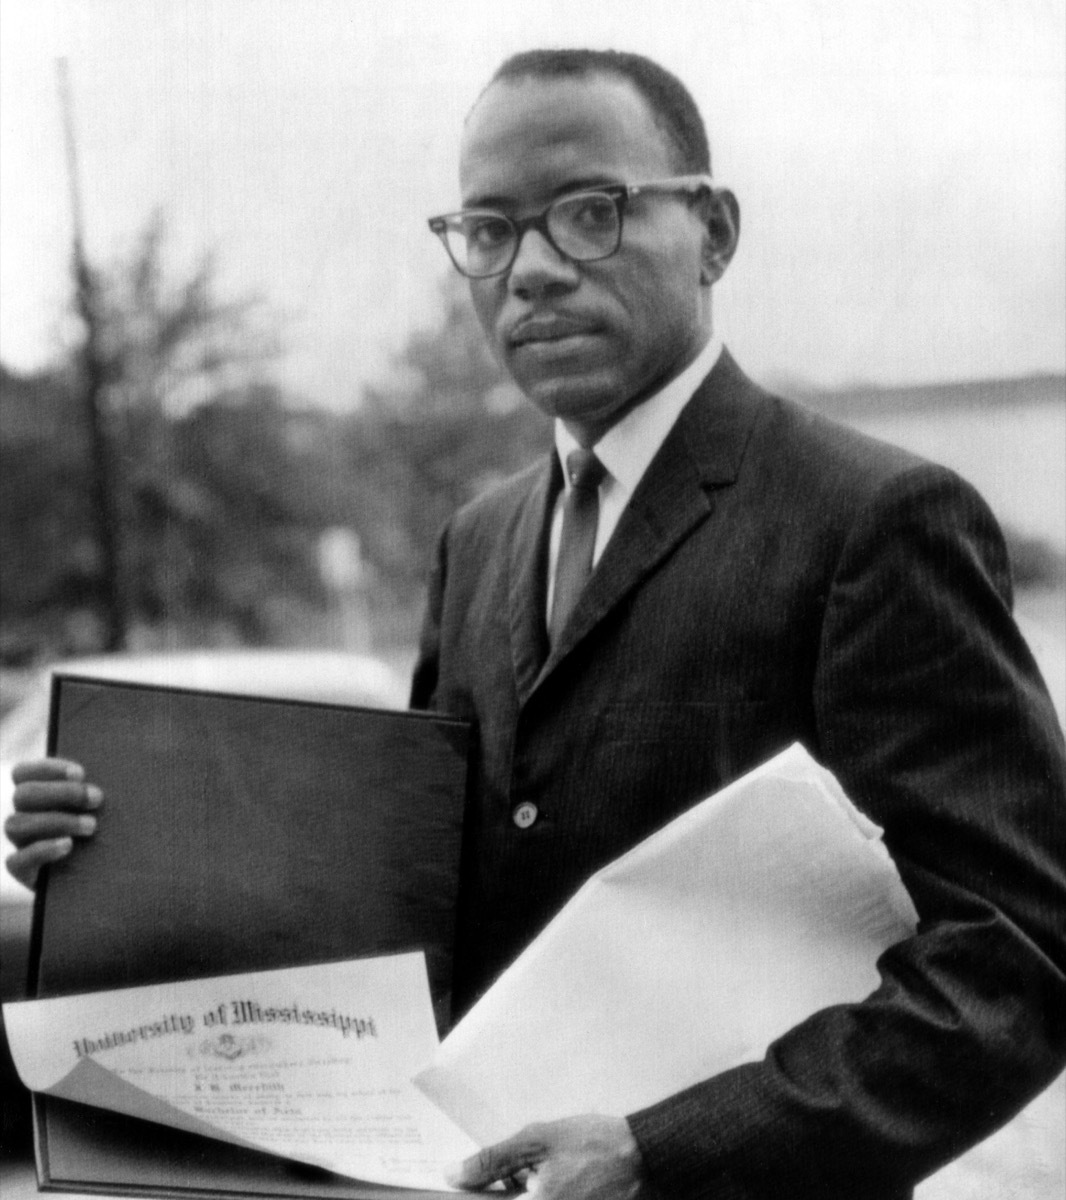 James Meredith, first African American to ever enroll and graduate from the University of Mississippi displays his diploma